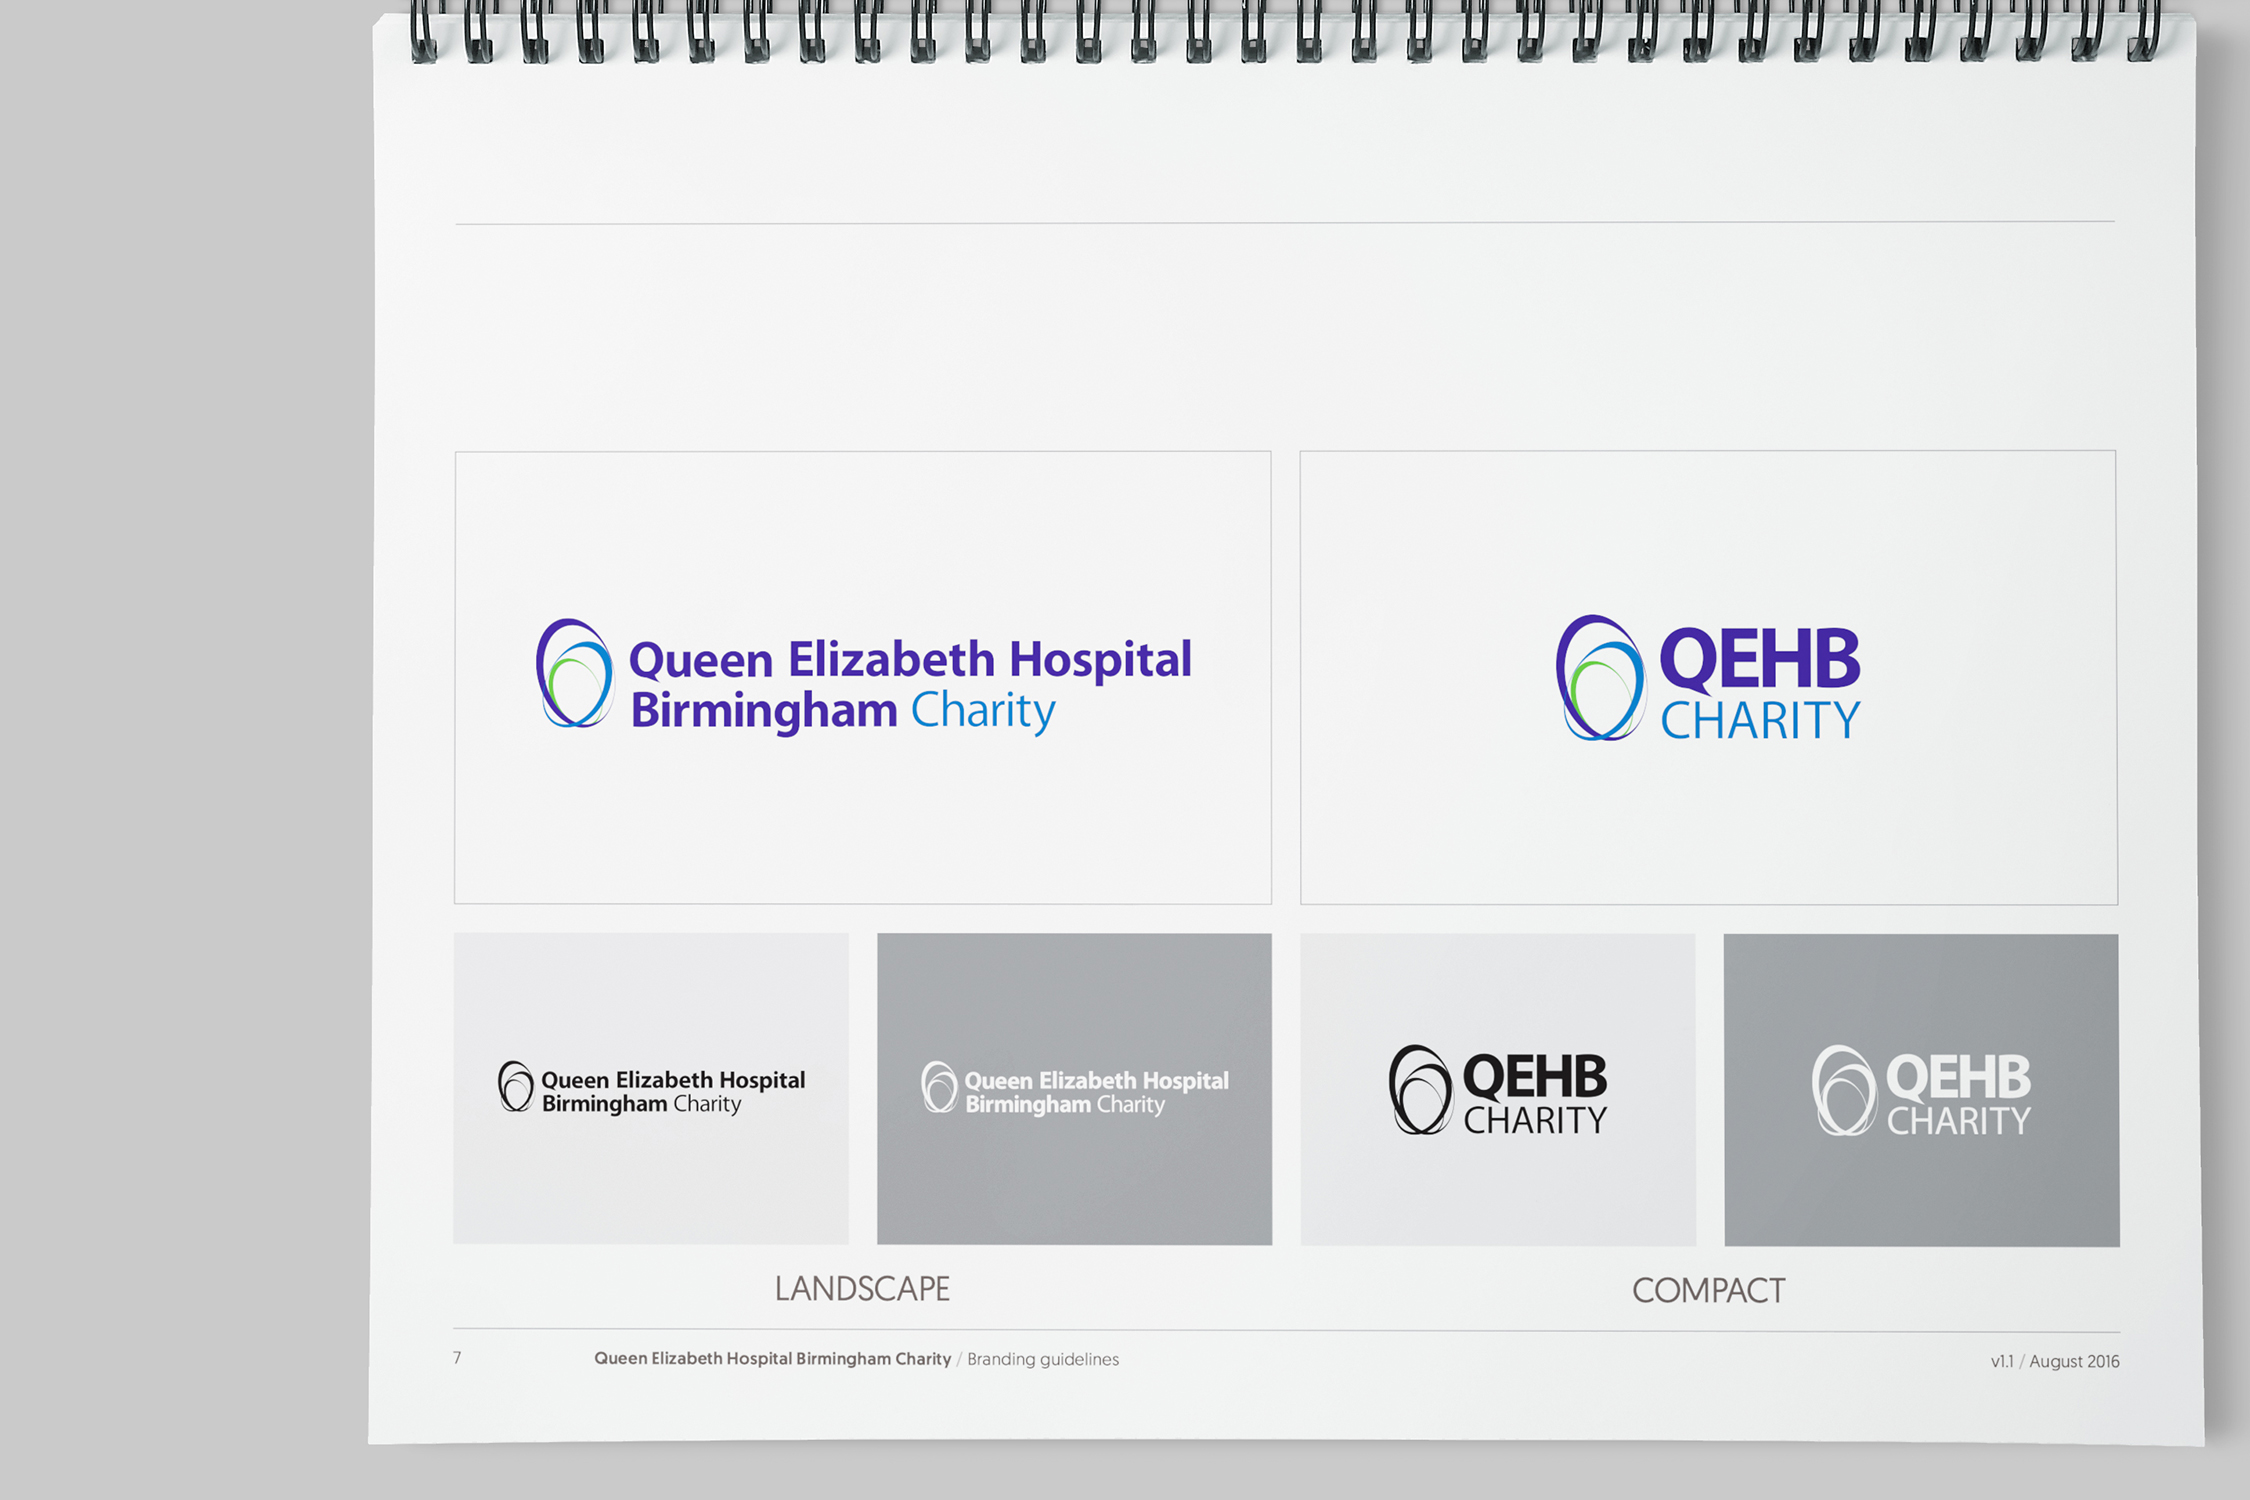 Spread from the 'Core Logos' section of the charity's new brand guidelines, showing the 'Landscape' and 'Compact' variants